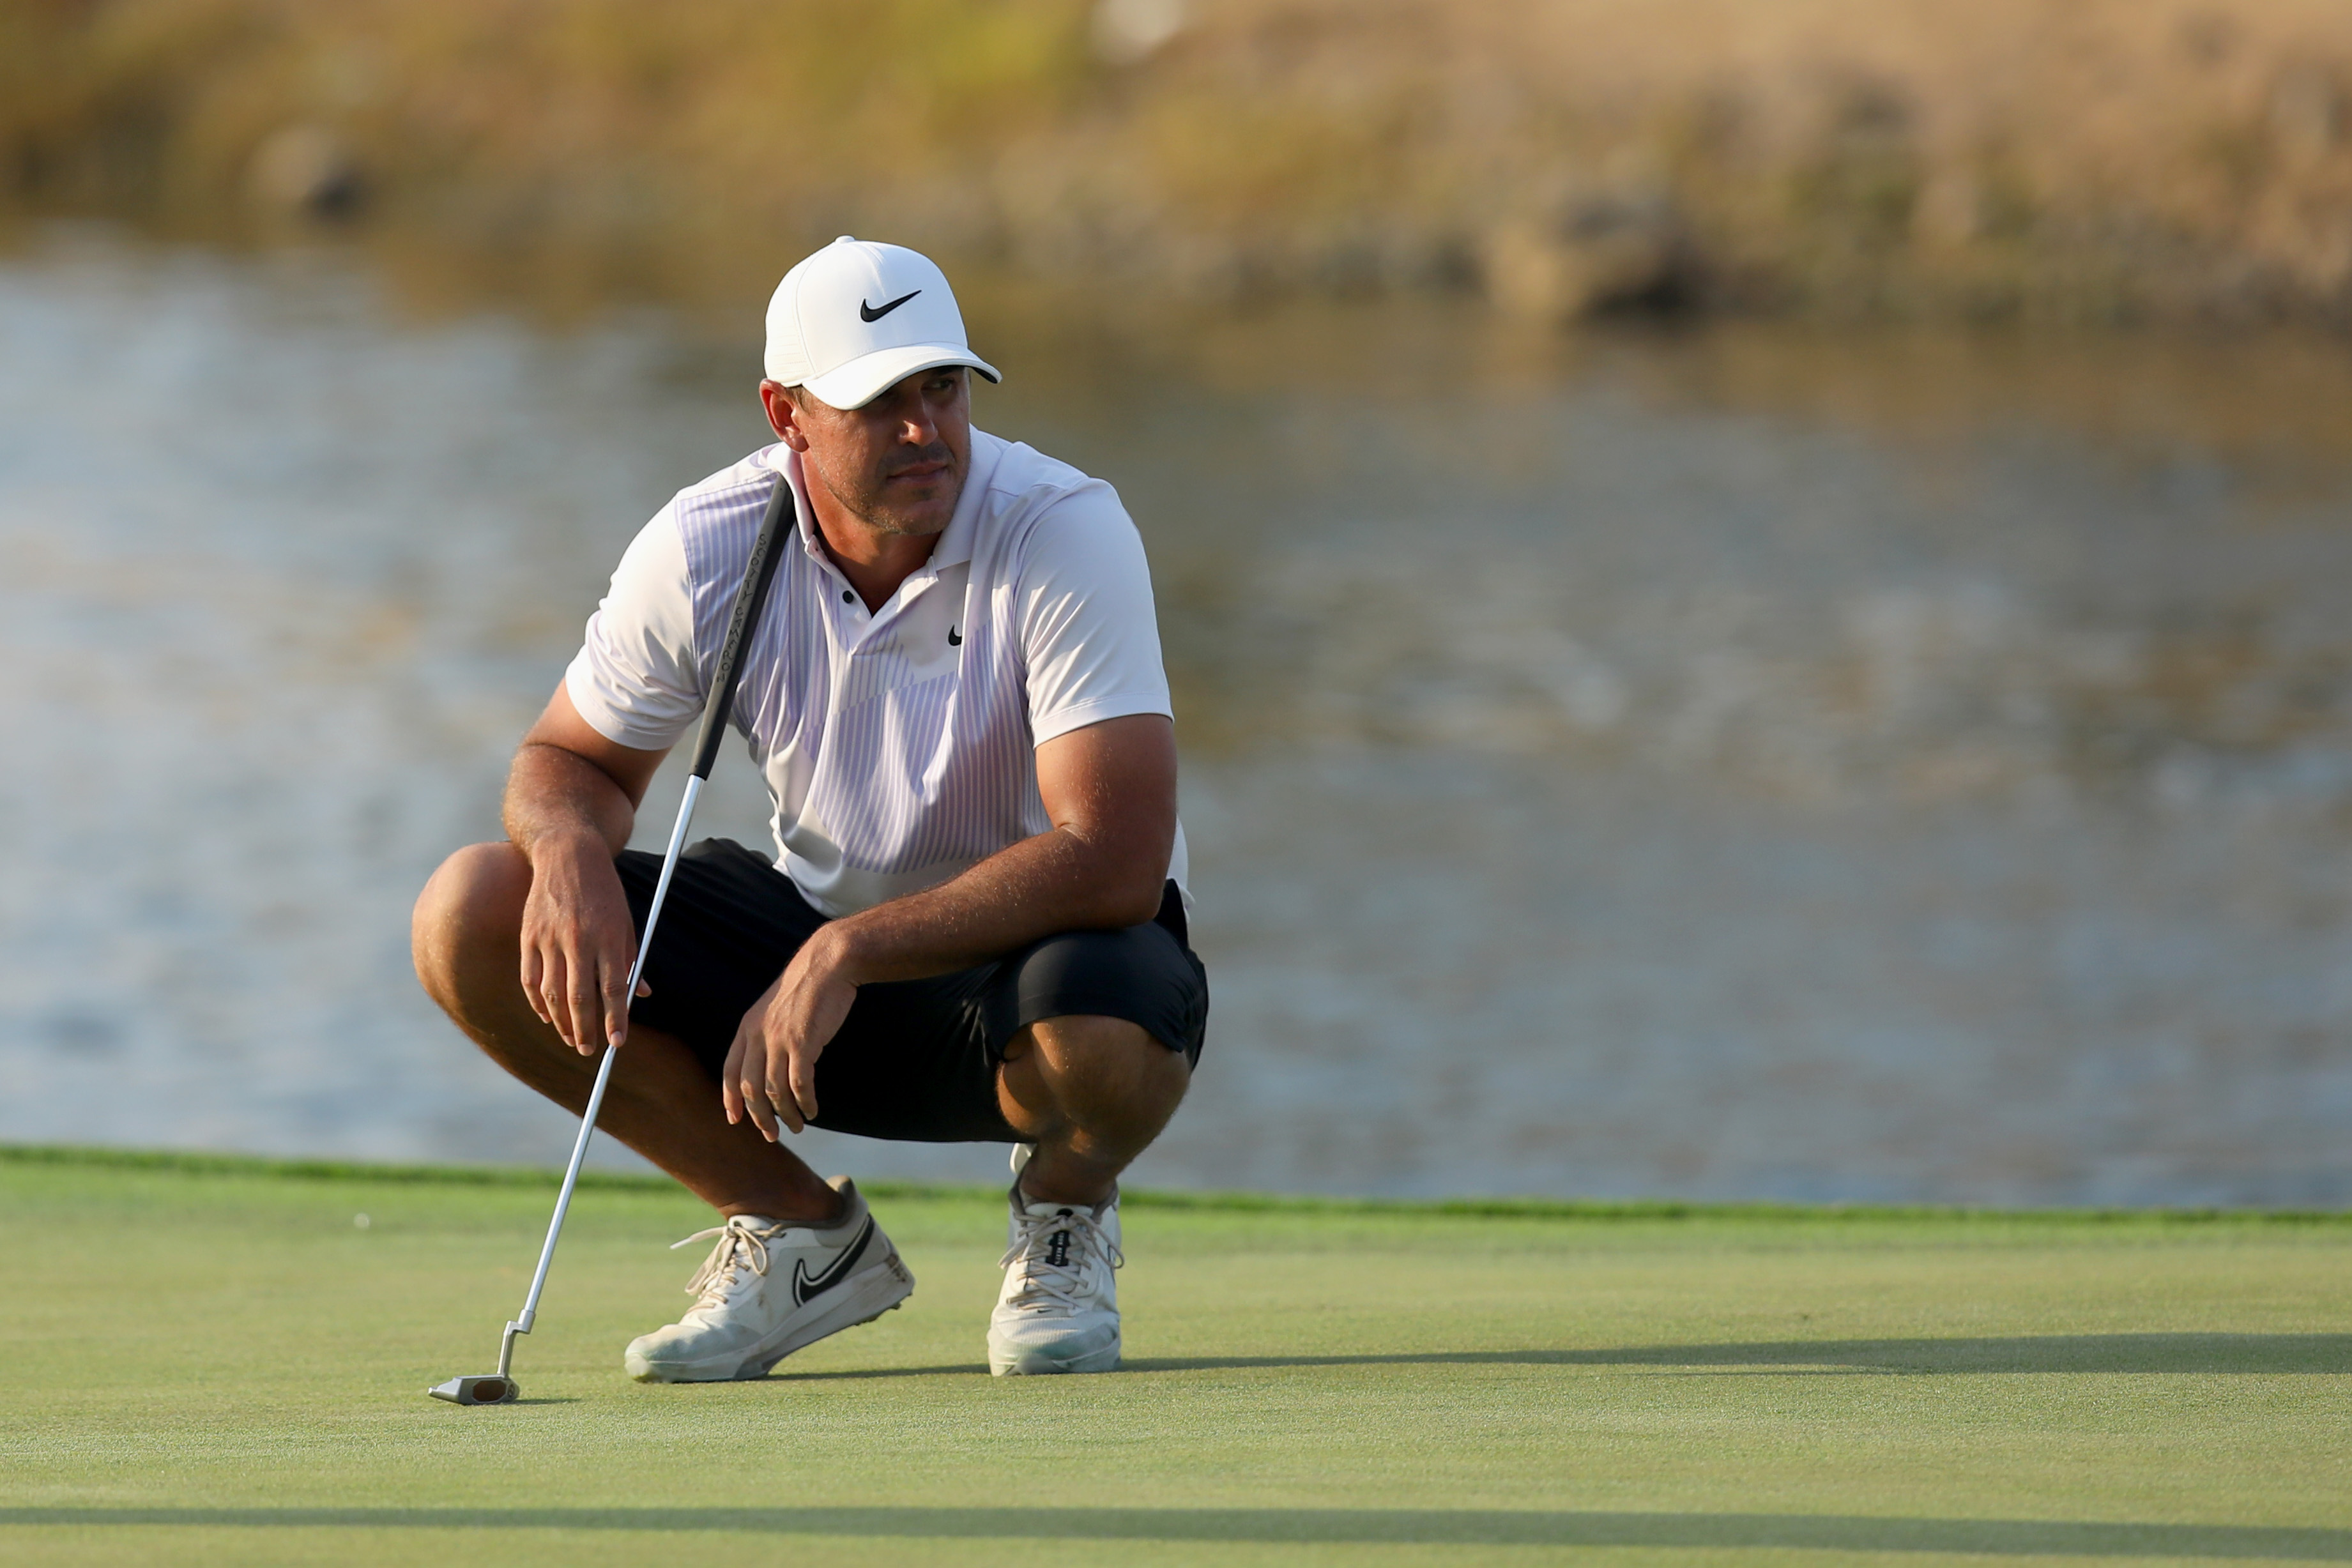 Team Captain Brooks Koepka of Smash GC waits to play his fourth shot on the 18th hole during day two of the LIV Golf Invitational - Jeddah at Royal Greens Golf &amp; Country Club on October 15, 2022 in King Abdullah Economic City, Saudi Arabia.